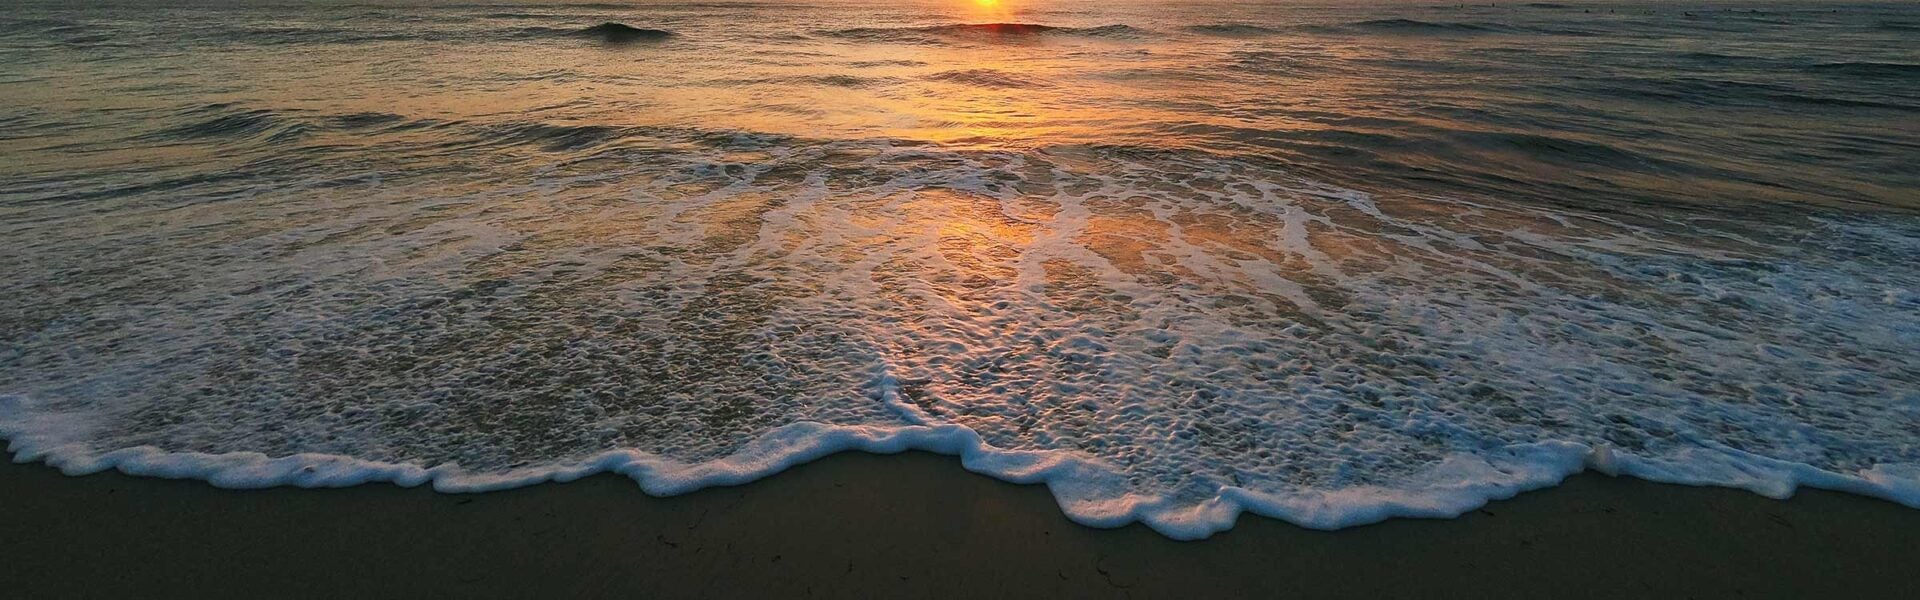 Ocean waves rolling onto a beach at sunset.